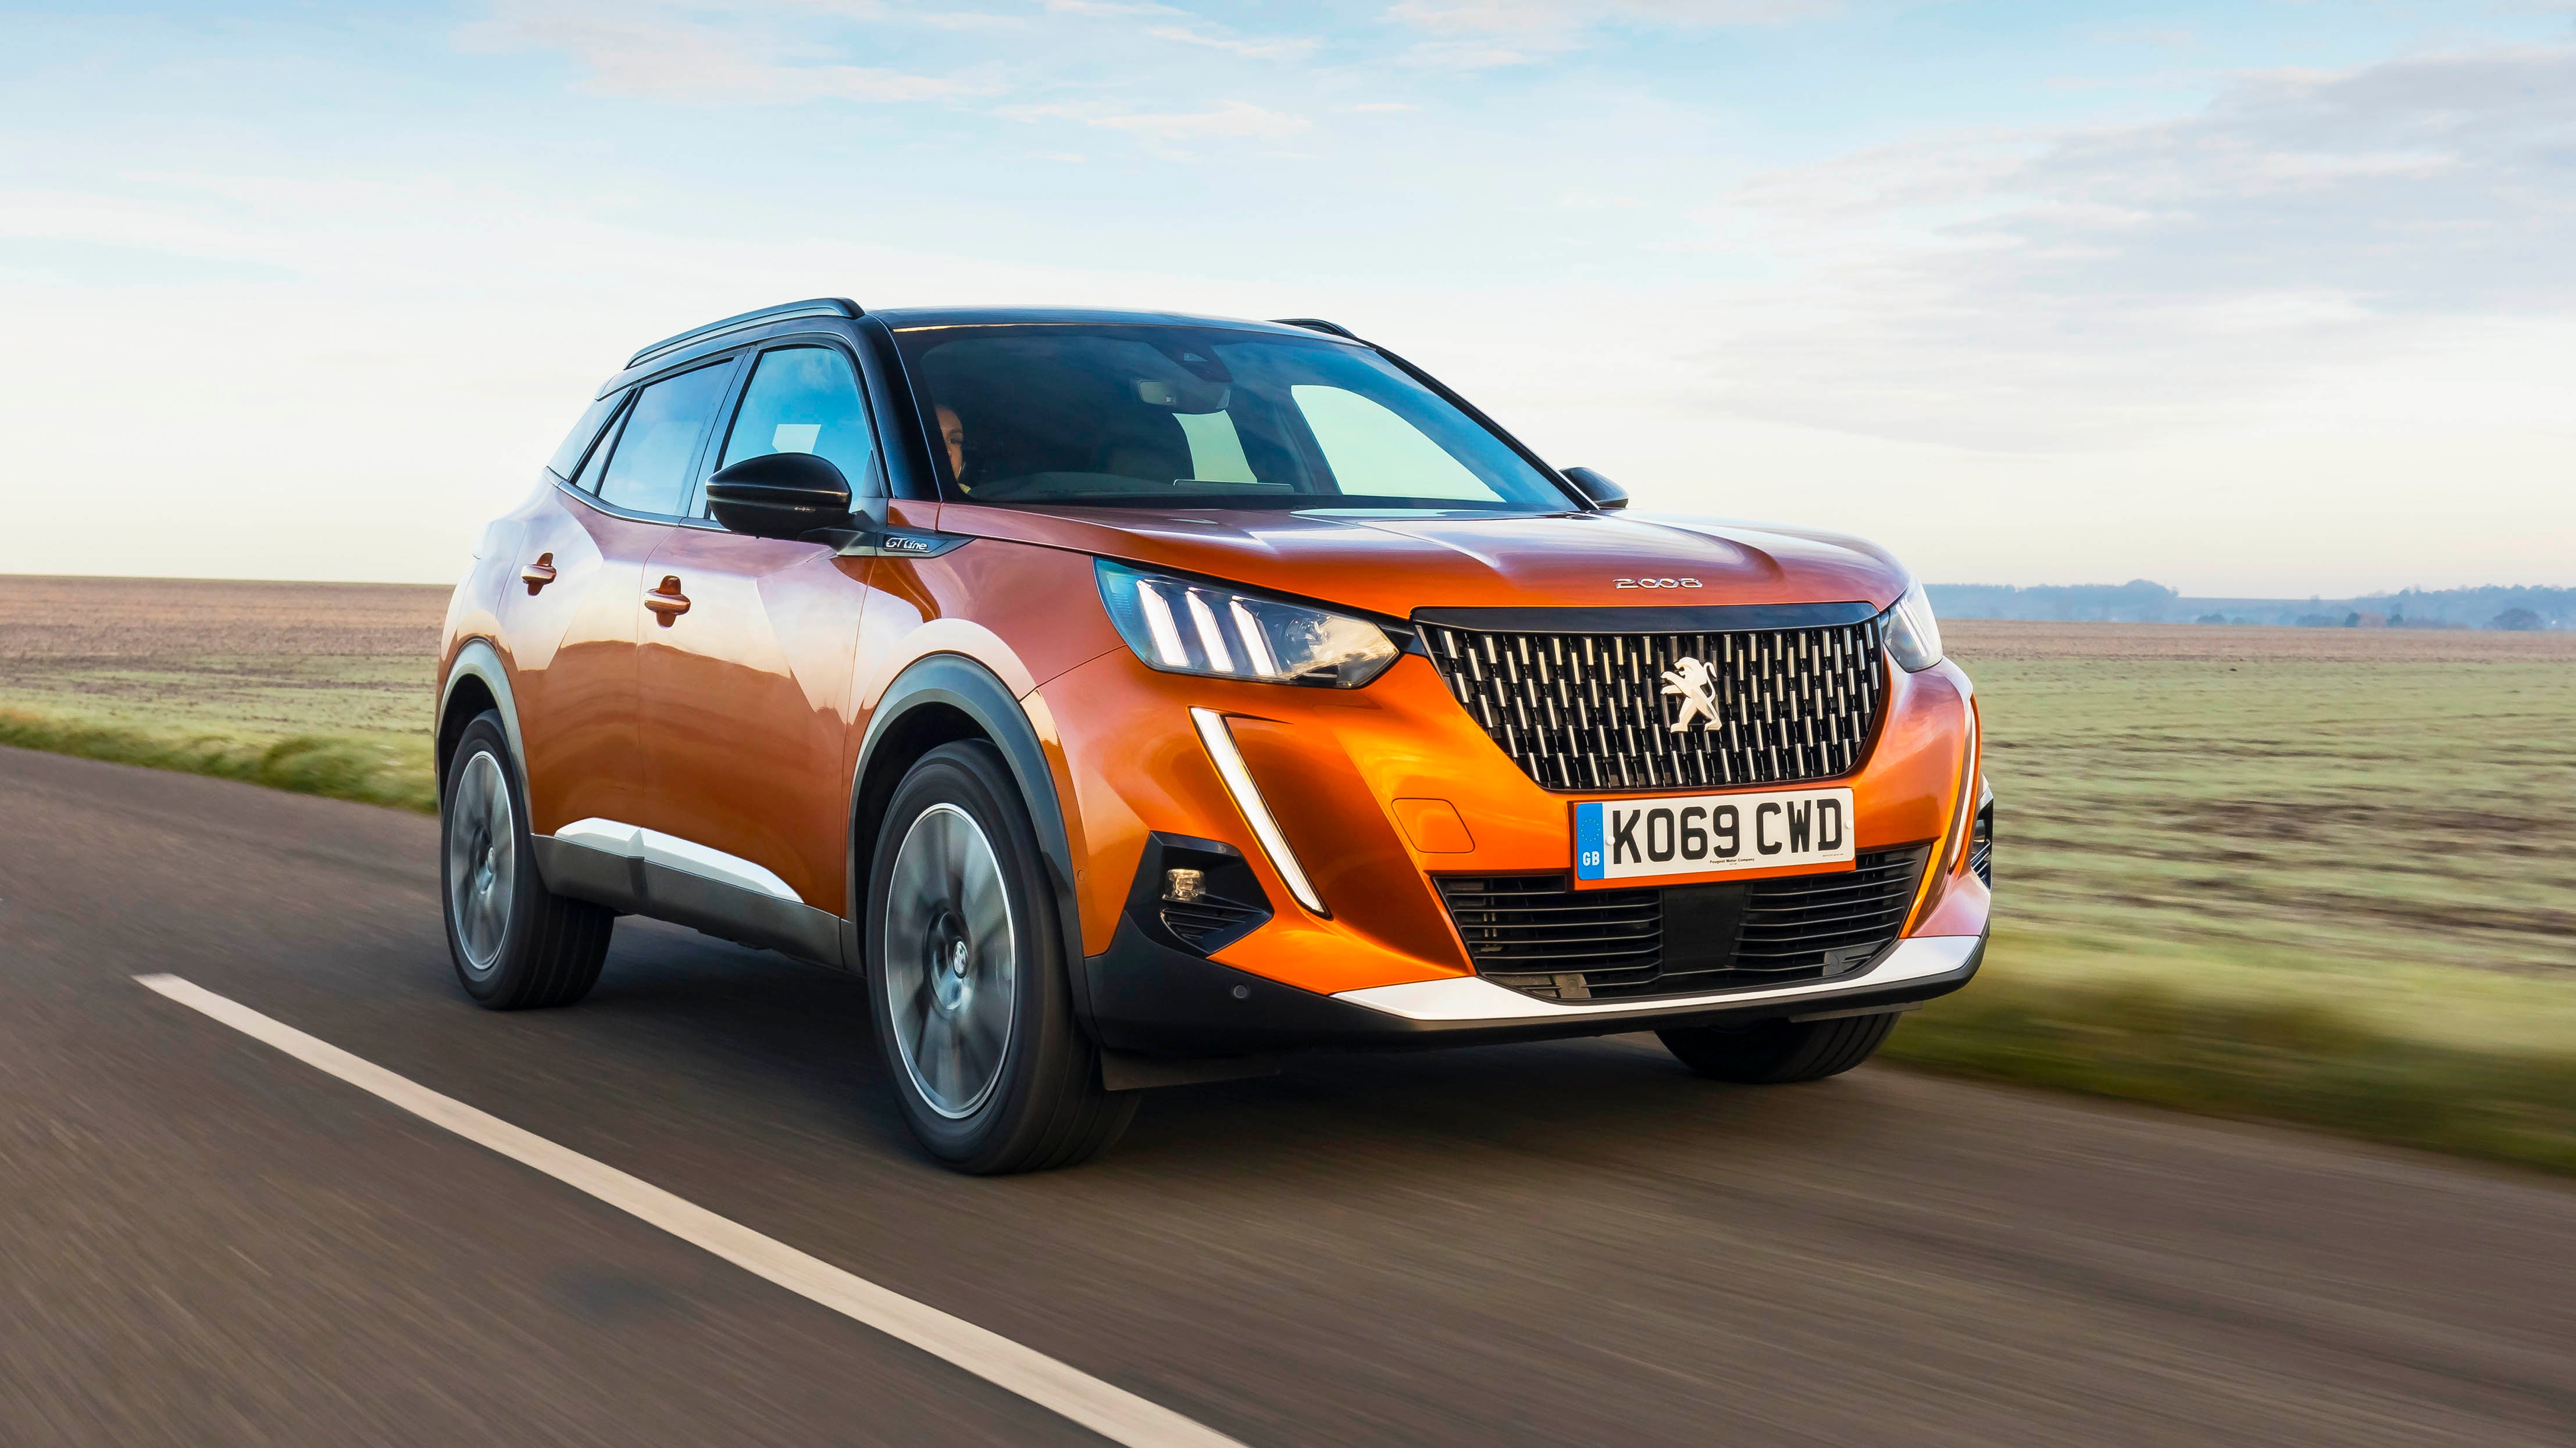 2020 Peugeot 2008 review: an eye-catching all-rounder – but is it worth the  price?